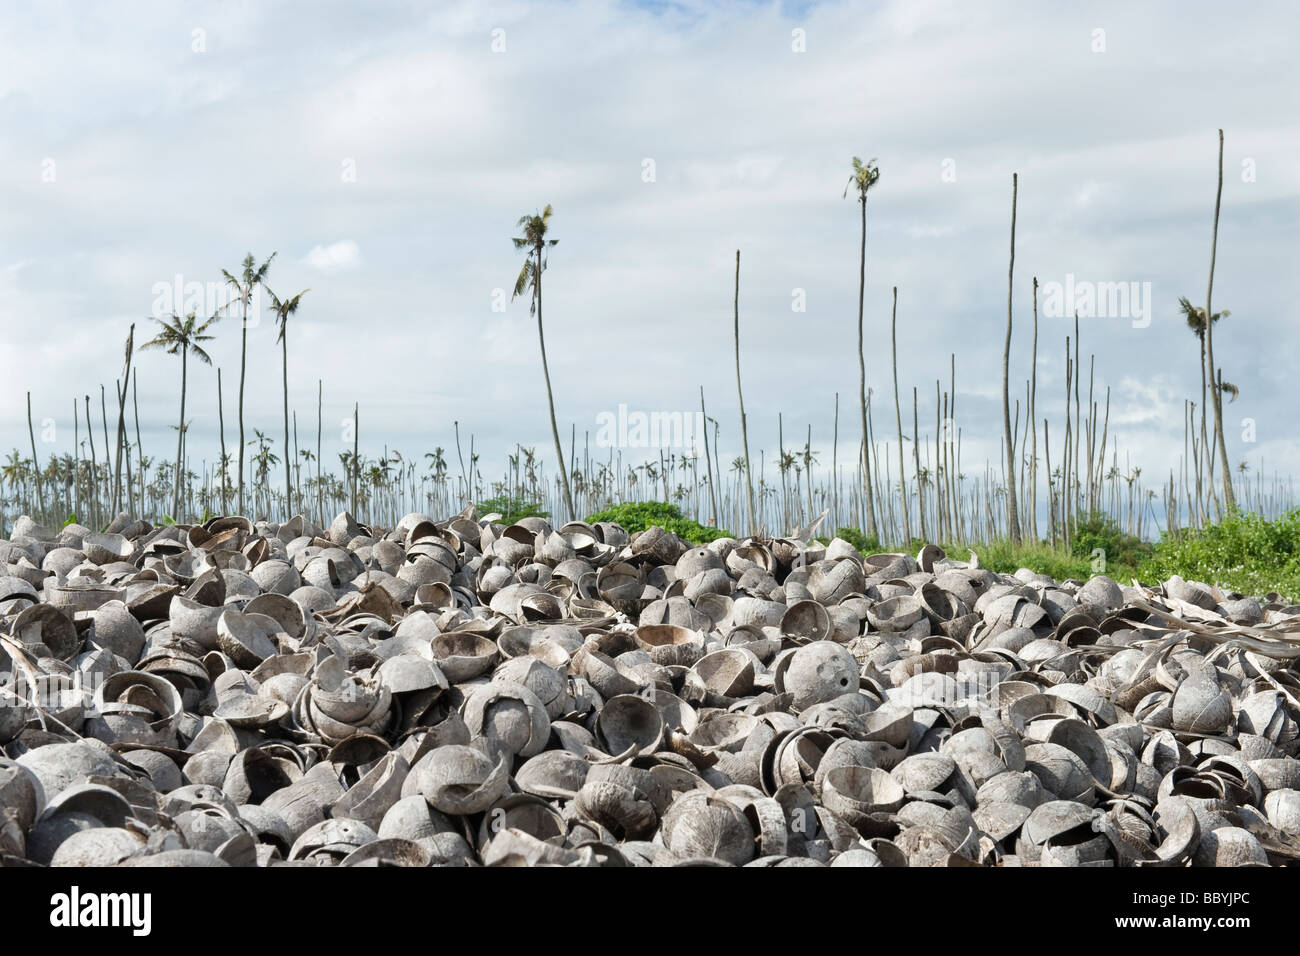 Empty coconut shells with copra removed dumped in a died off plantation Quelimane Mozambique Stock Photo